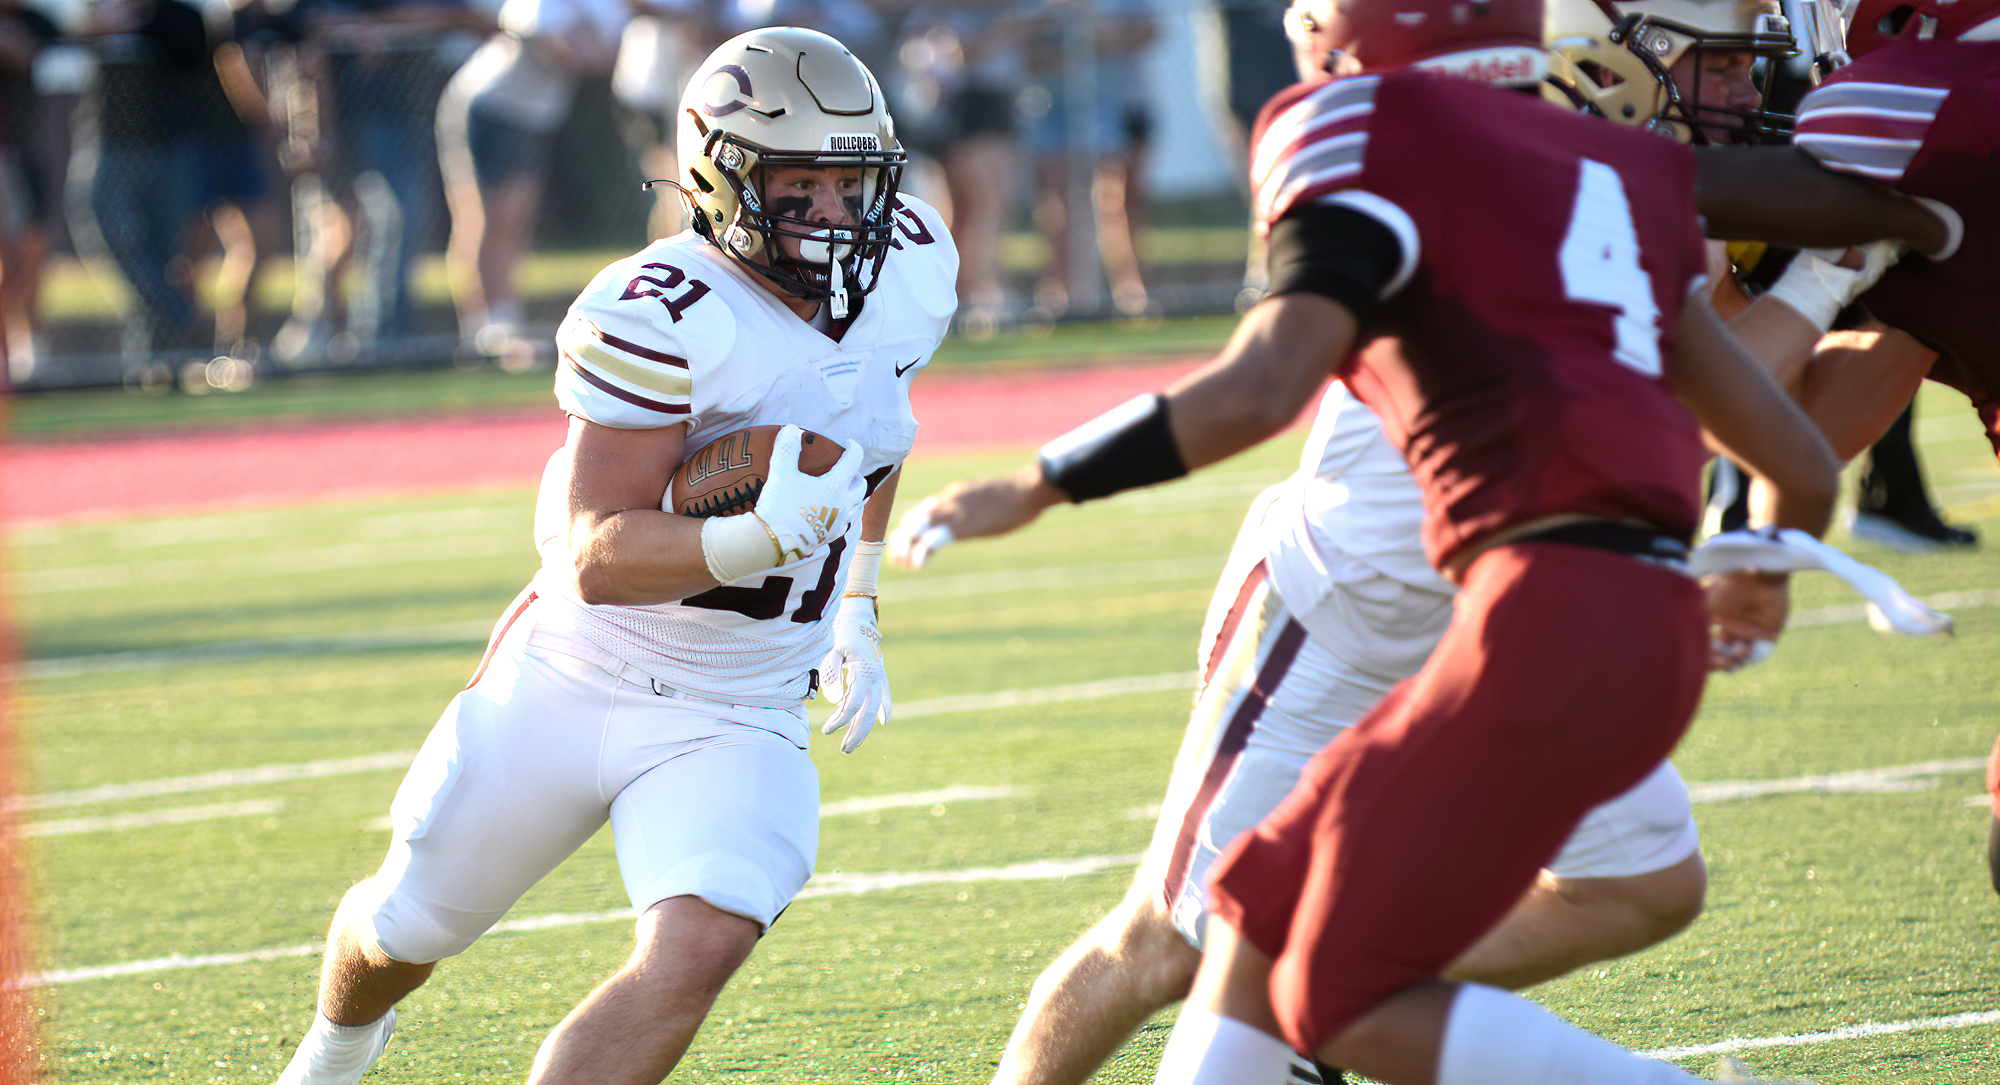 Cobbers running back Peyton Mortenson brings farm-tough 'grittiness' to the Concordia offense.